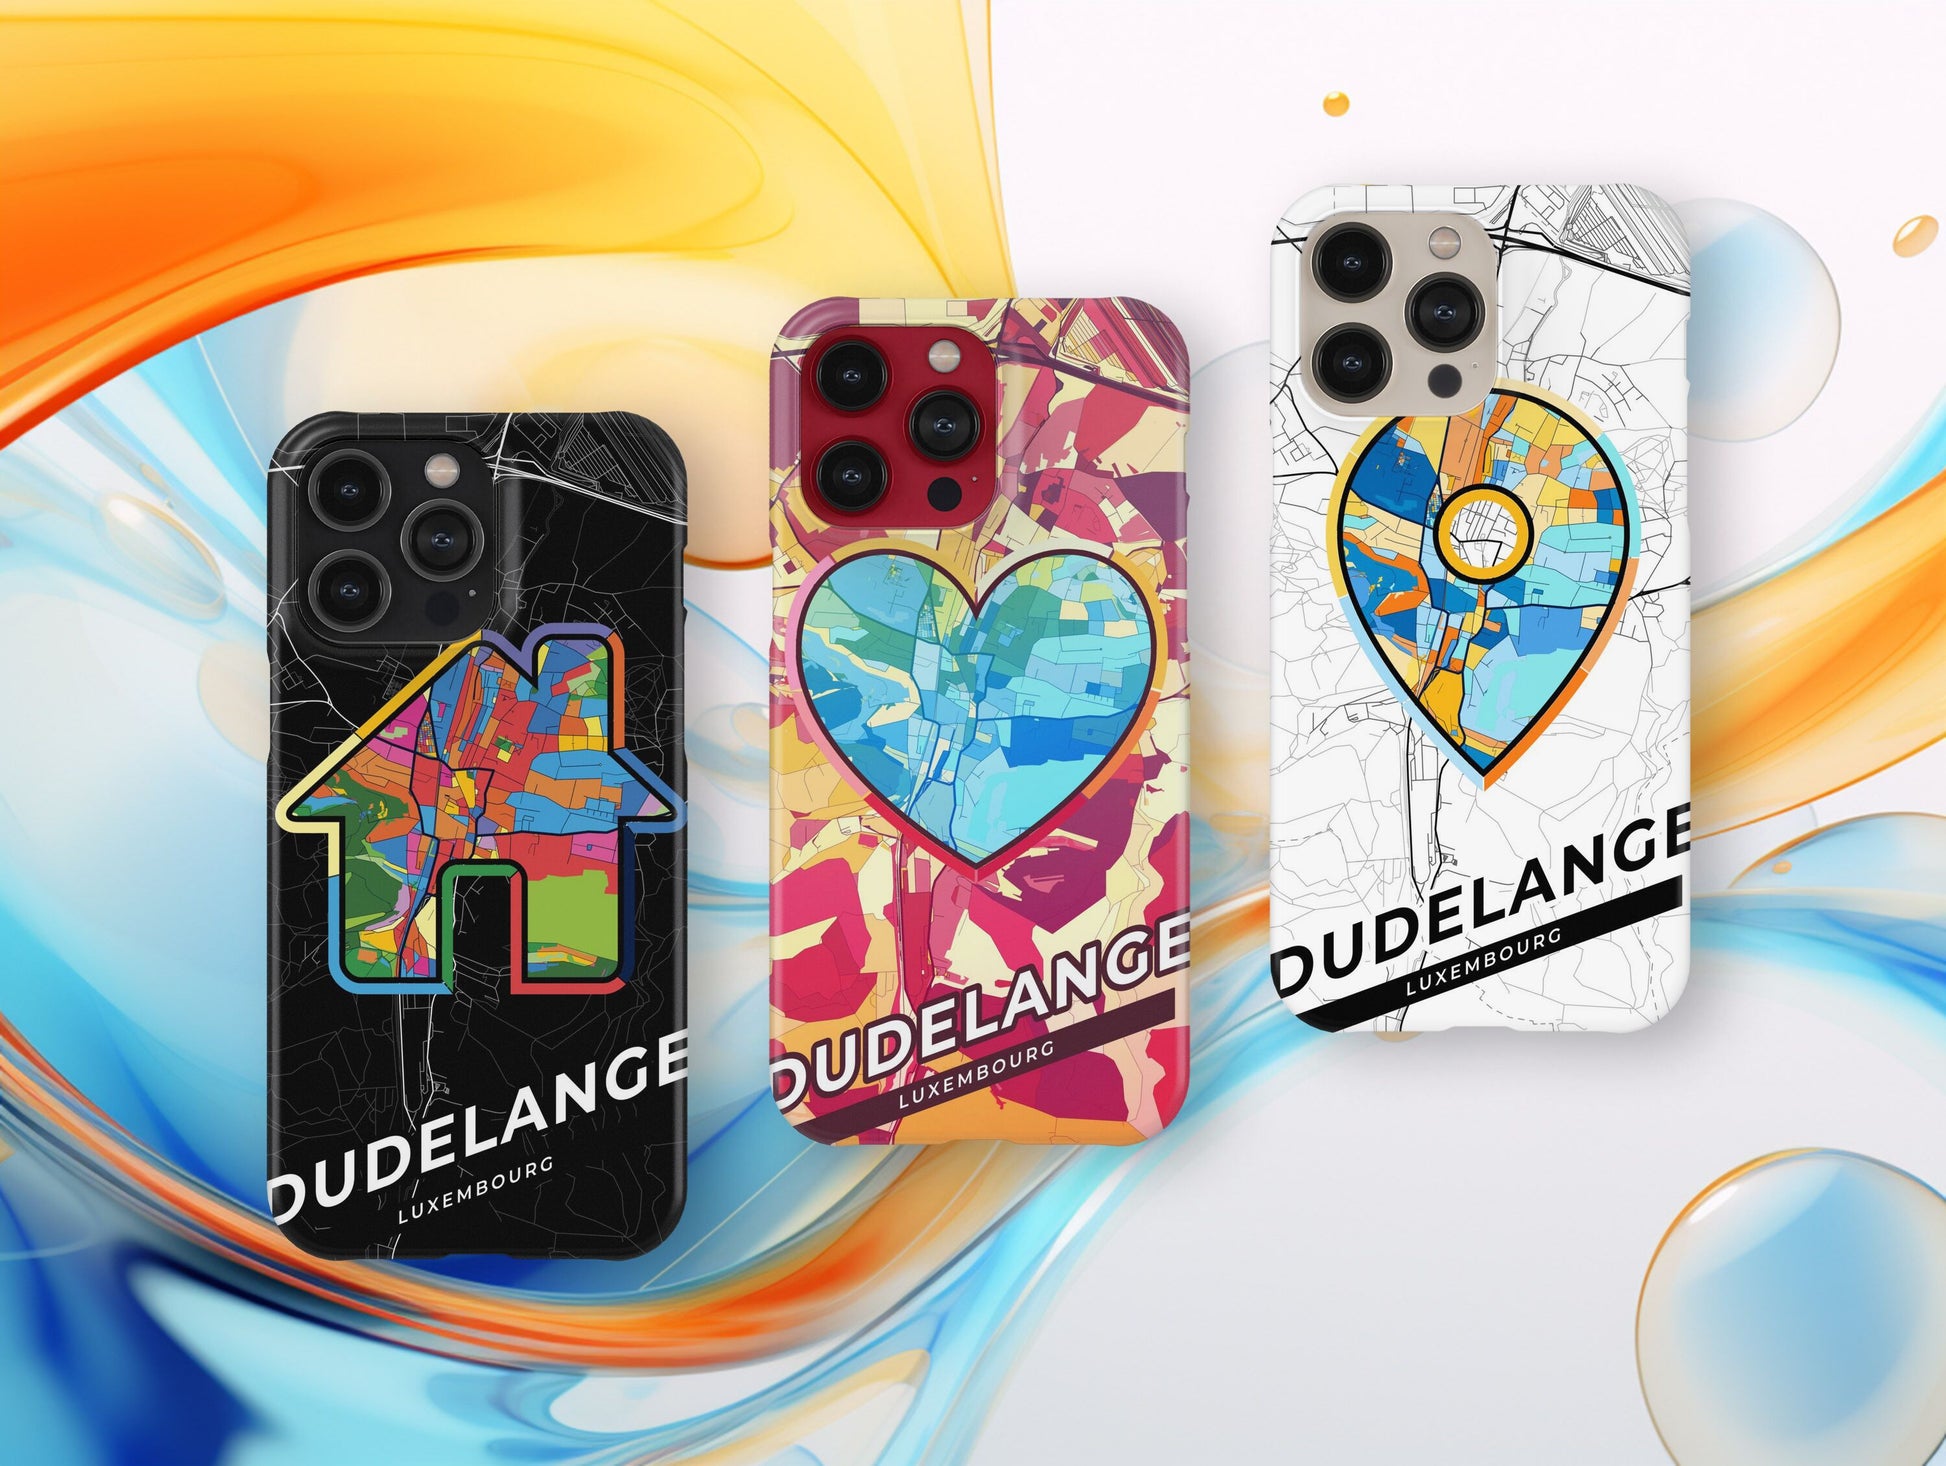 Dudelange Luxembourg slim phone case with colorful icon. Birthday, wedding or housewarming gift. Couple match cases.